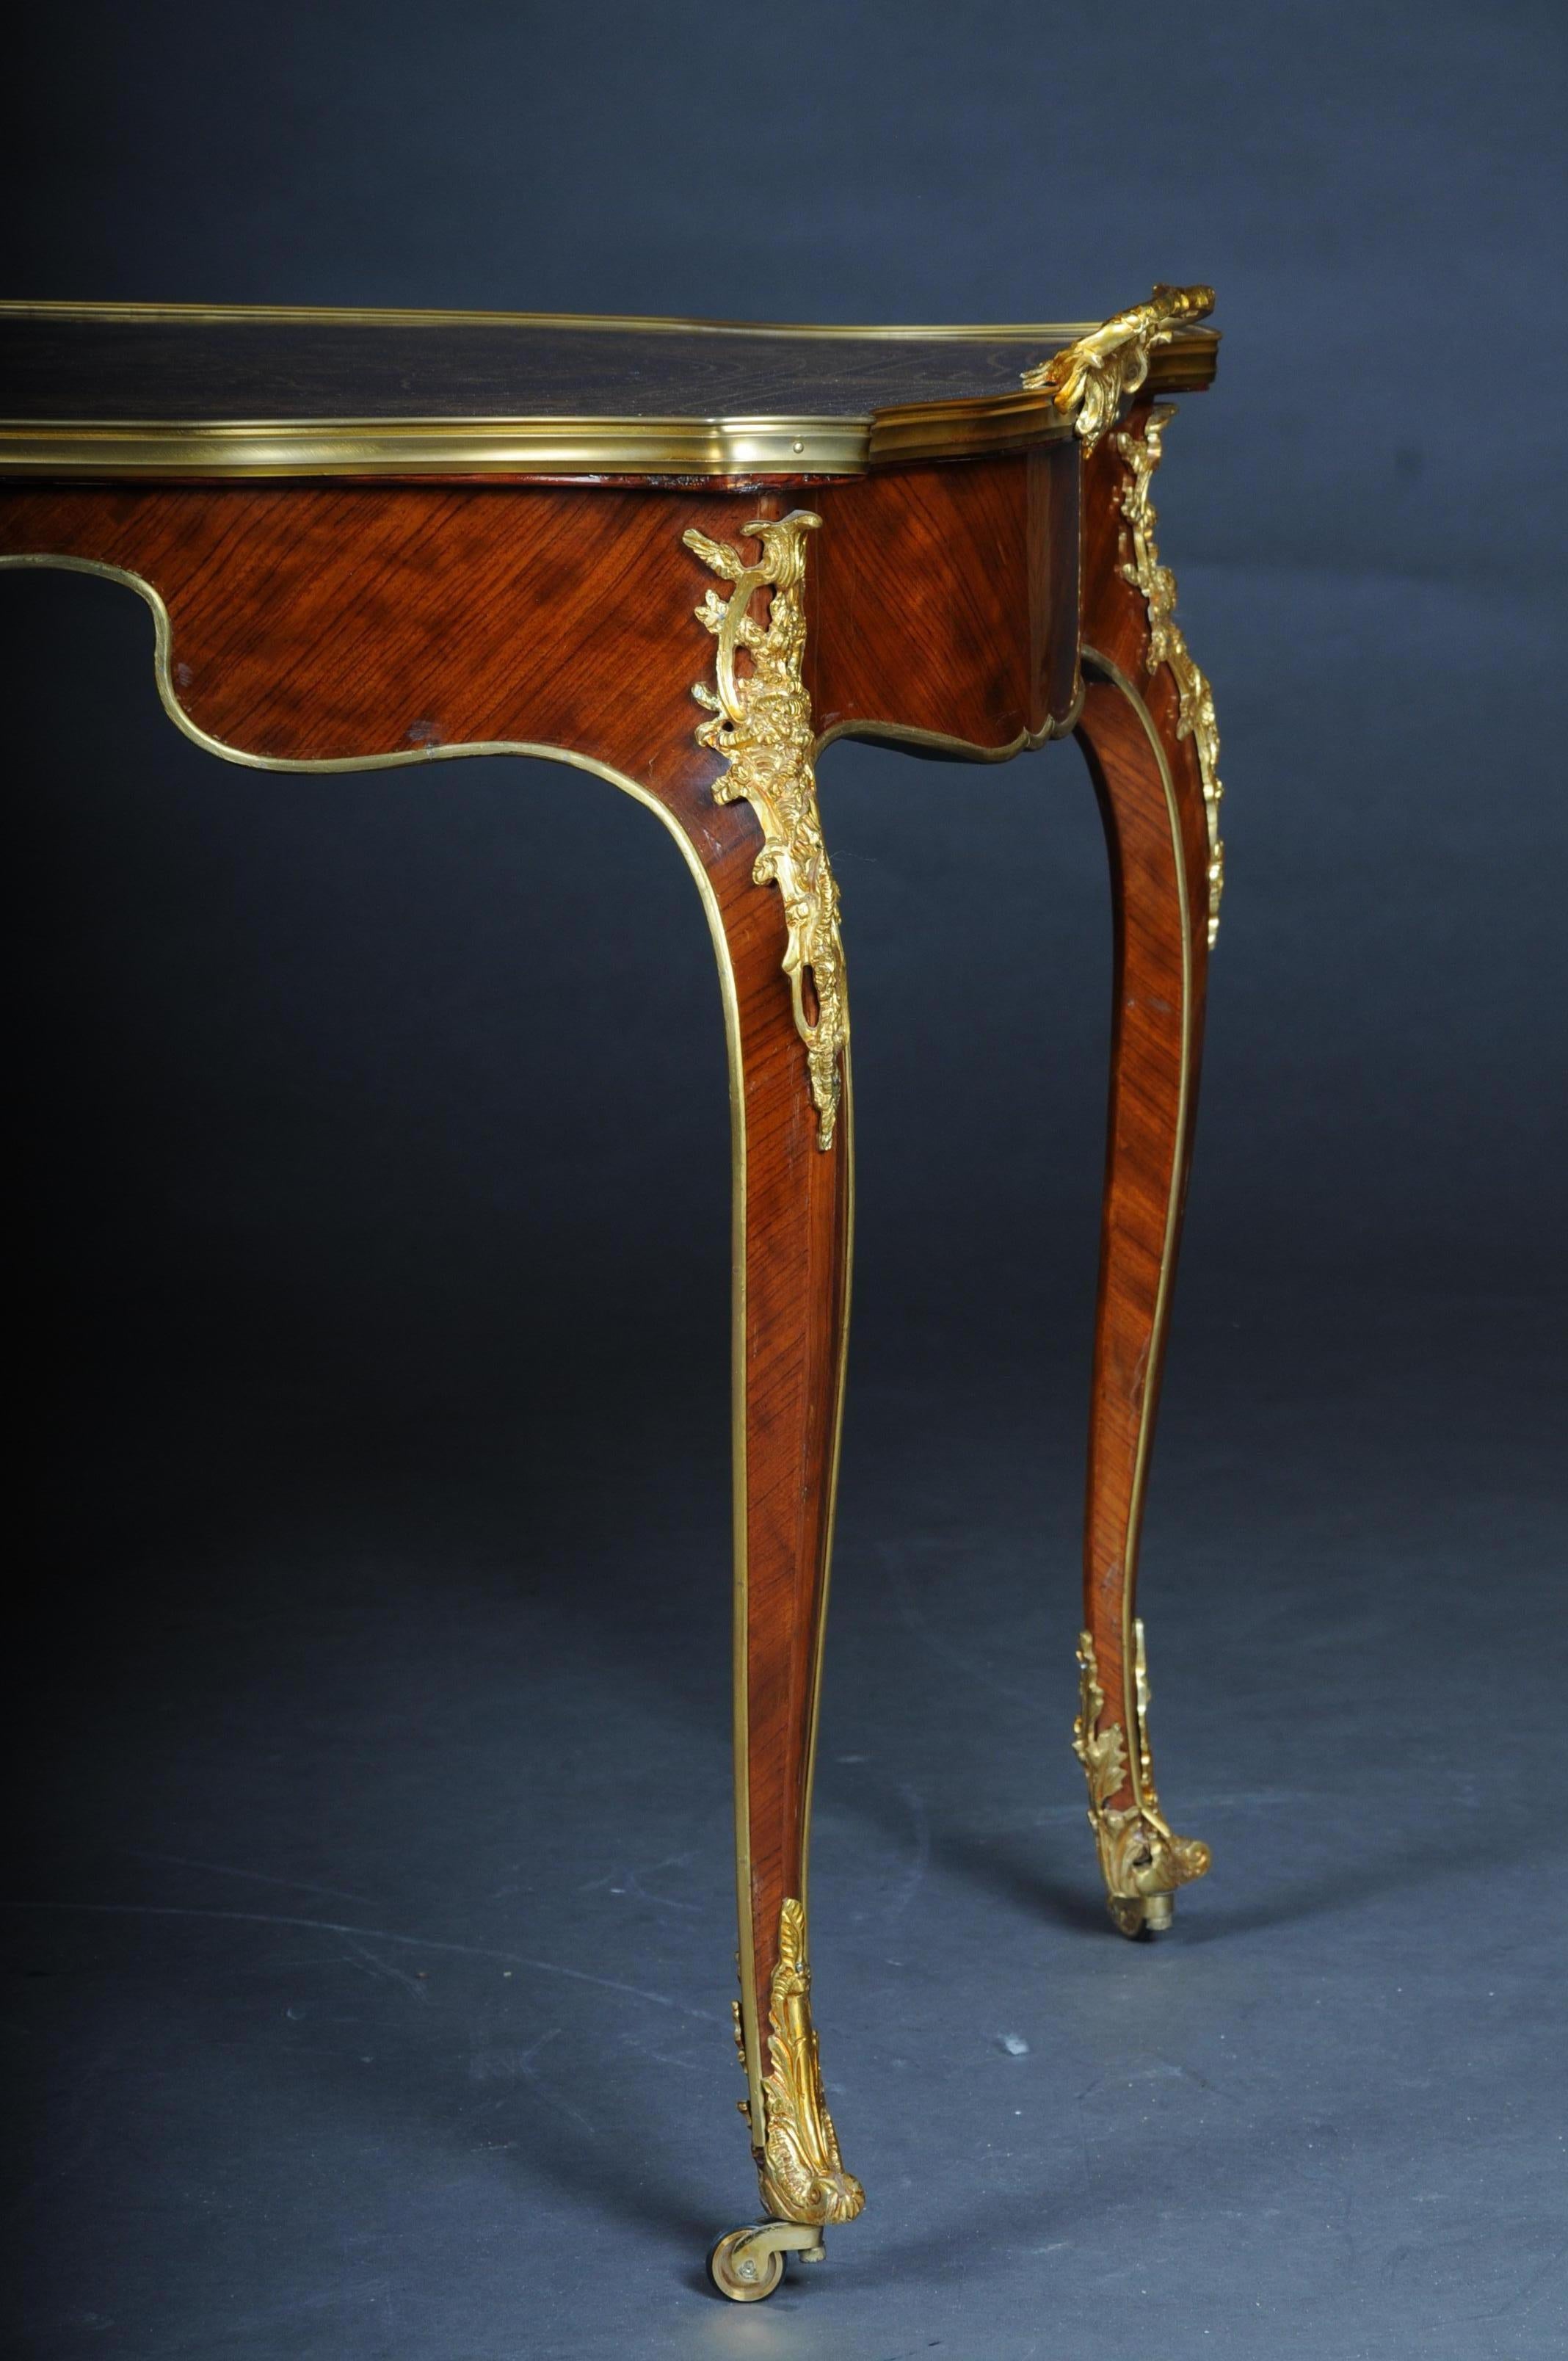 Elegant French Salon Table in Louis Quinze Style For Sale 6